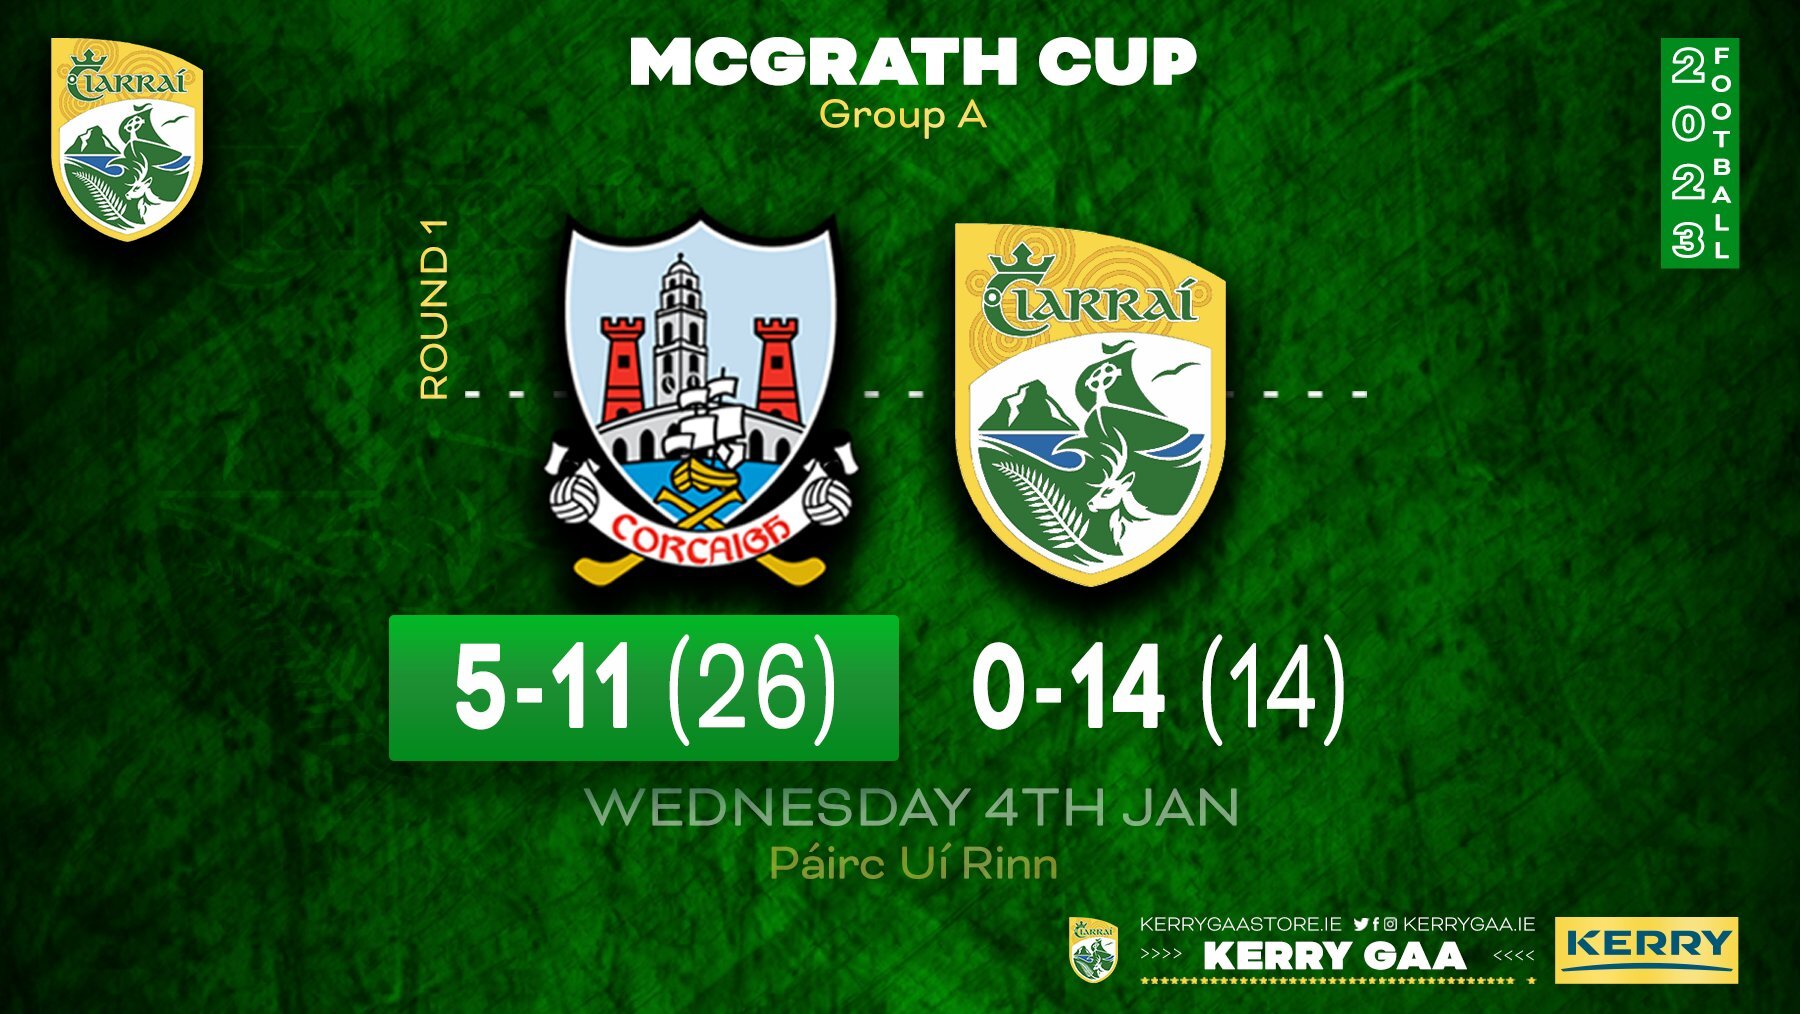 Defeat for Kerry in McGrath Cup opening round.